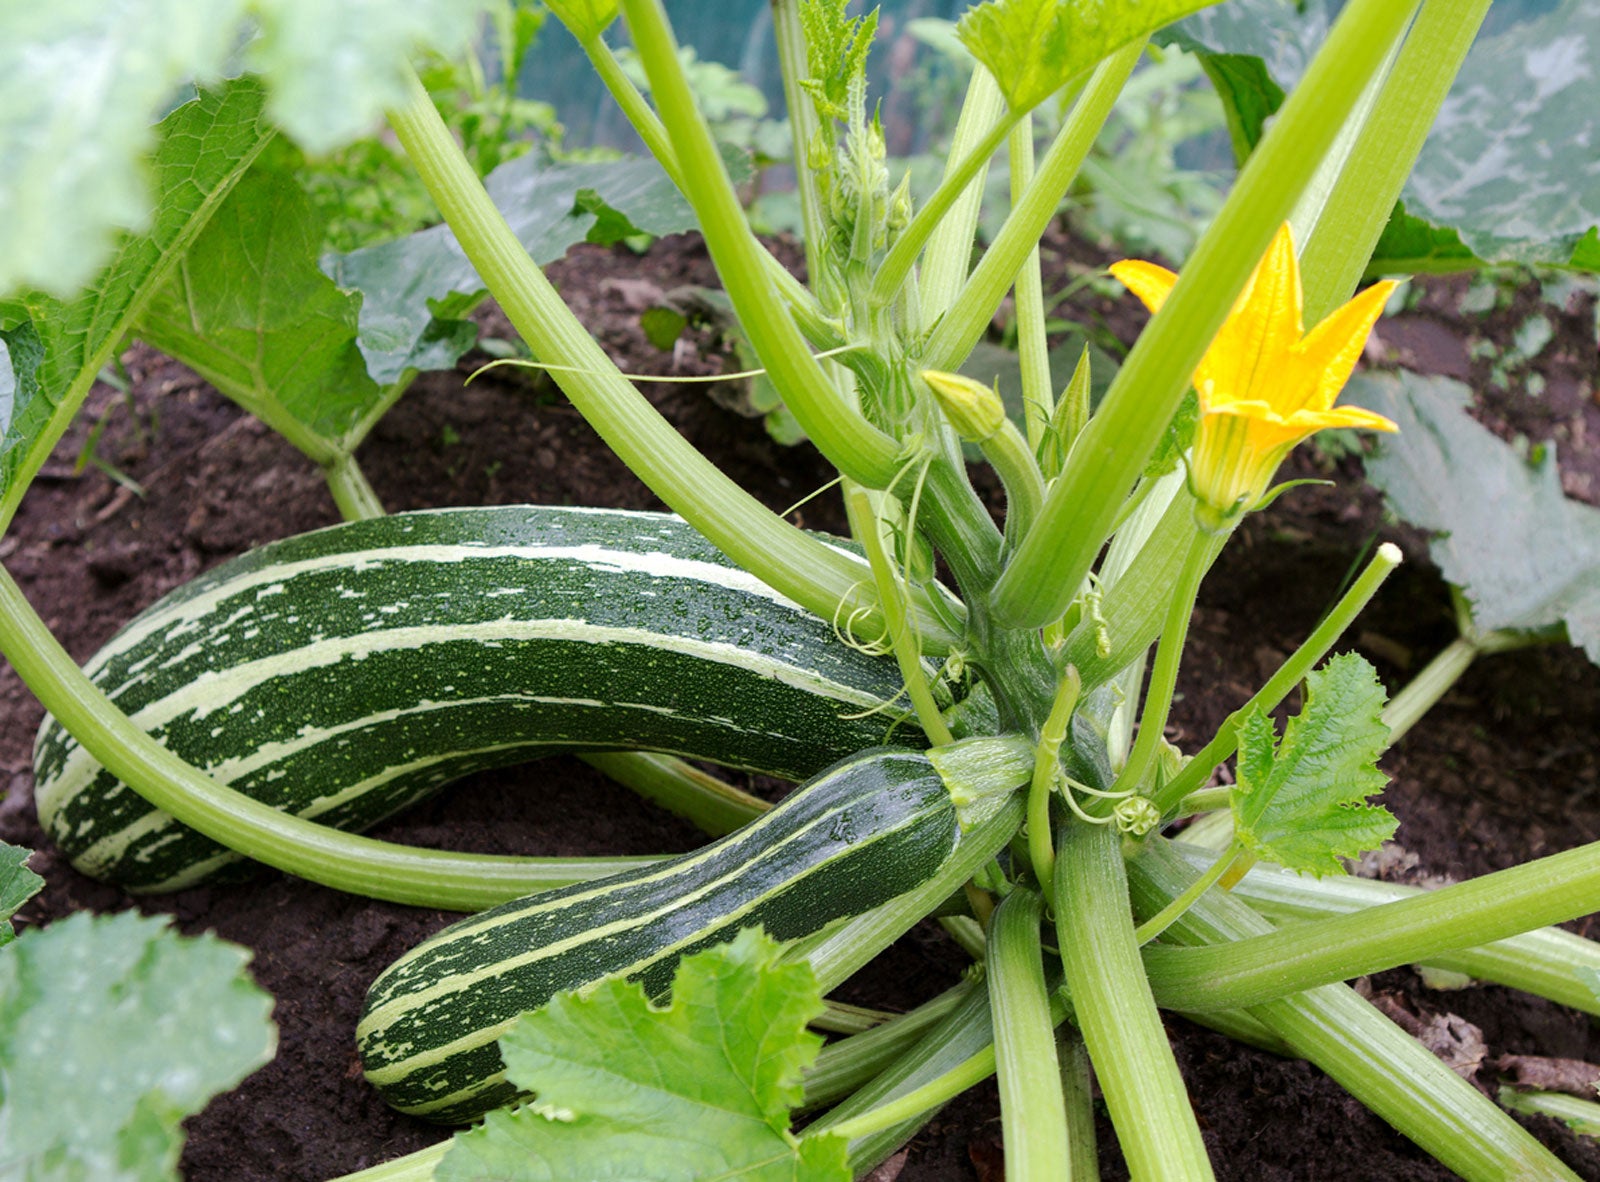 Information About Pruning Zucchini Plants